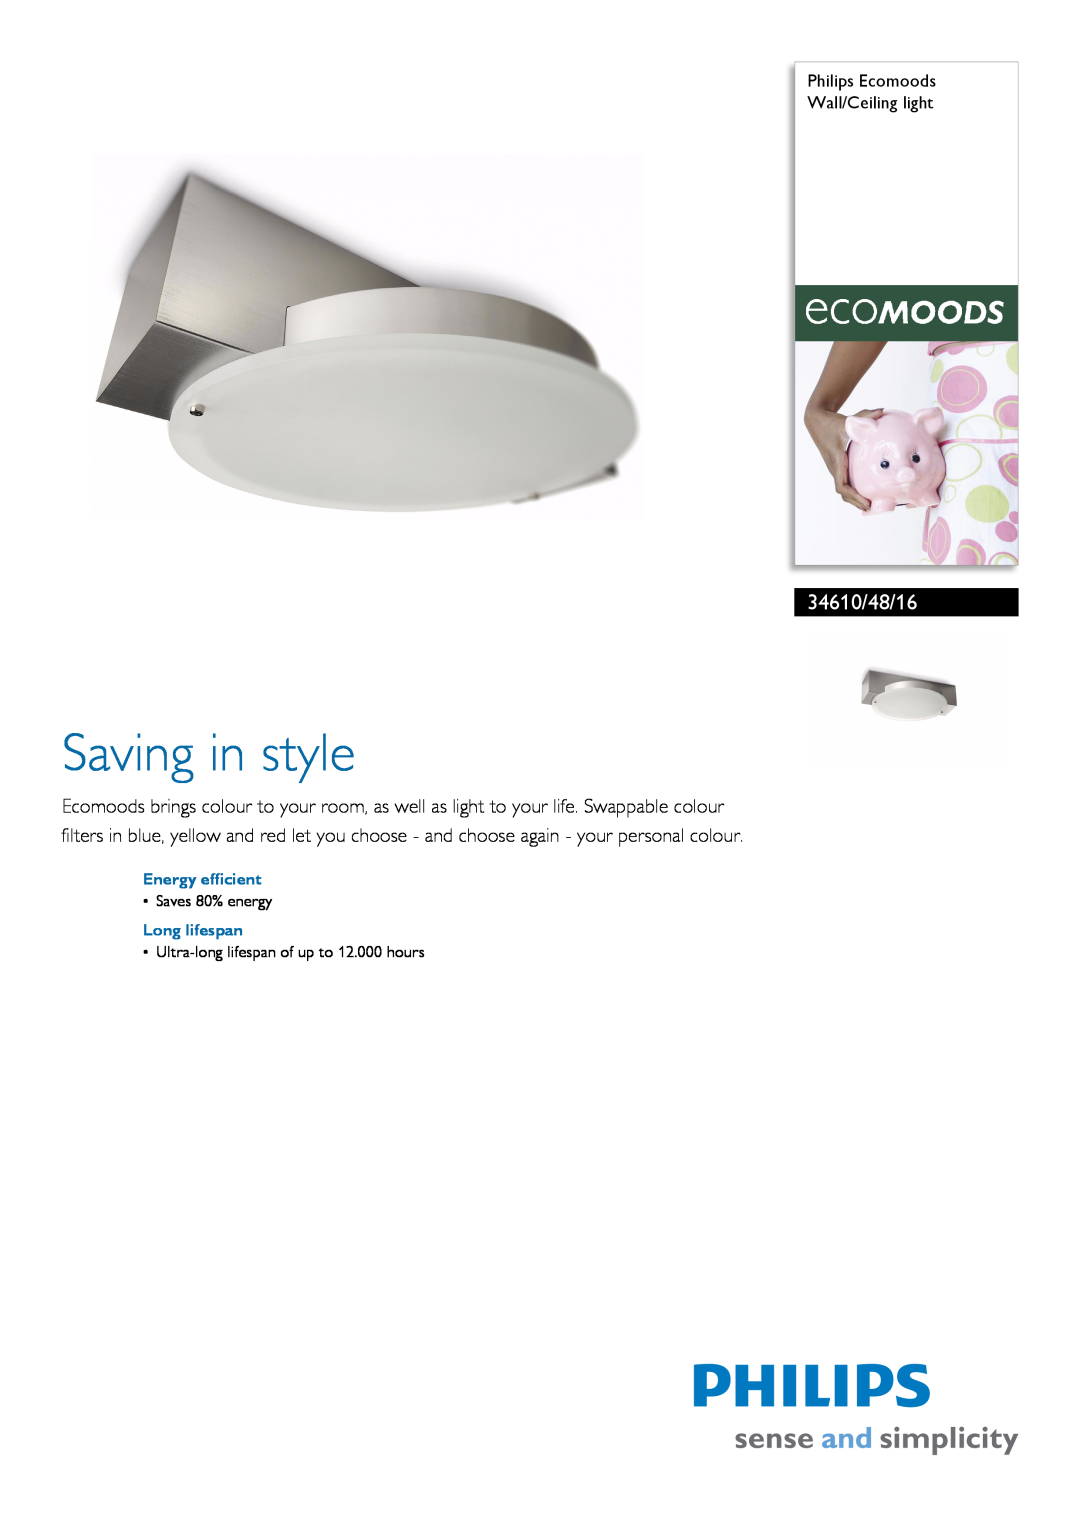 Philips 34610/48/16 manual Philips Ecomoods Wall/Ceiling light, Energy efficient, Long lifespan, Saving in style 